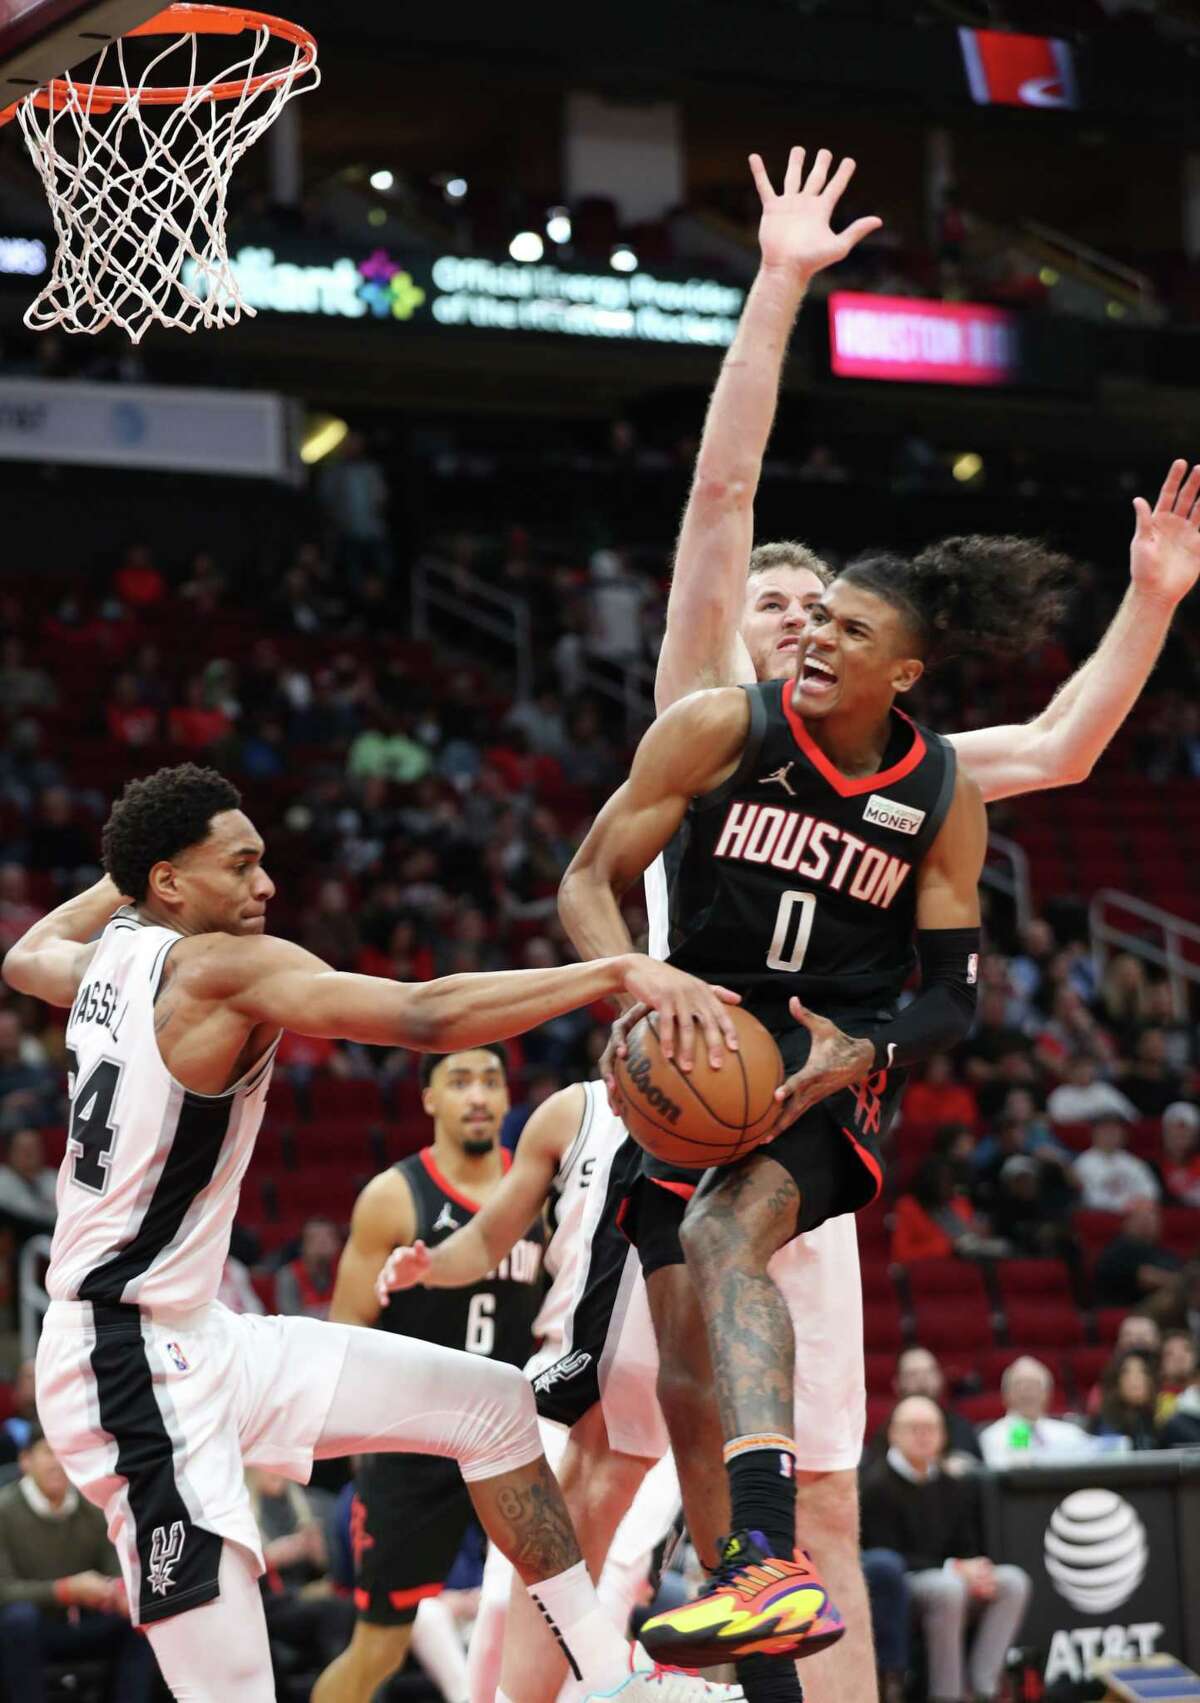 Houston Rockets guard Jalen Green (0) drives to the basket while San Antonio Spurs guard Devin Vassell (24) and center Jakob Poeltl (25) defend during the second quarter of an NBA game Tuesday, Jan. 25, 2022, at the Toyota Center in Houston.